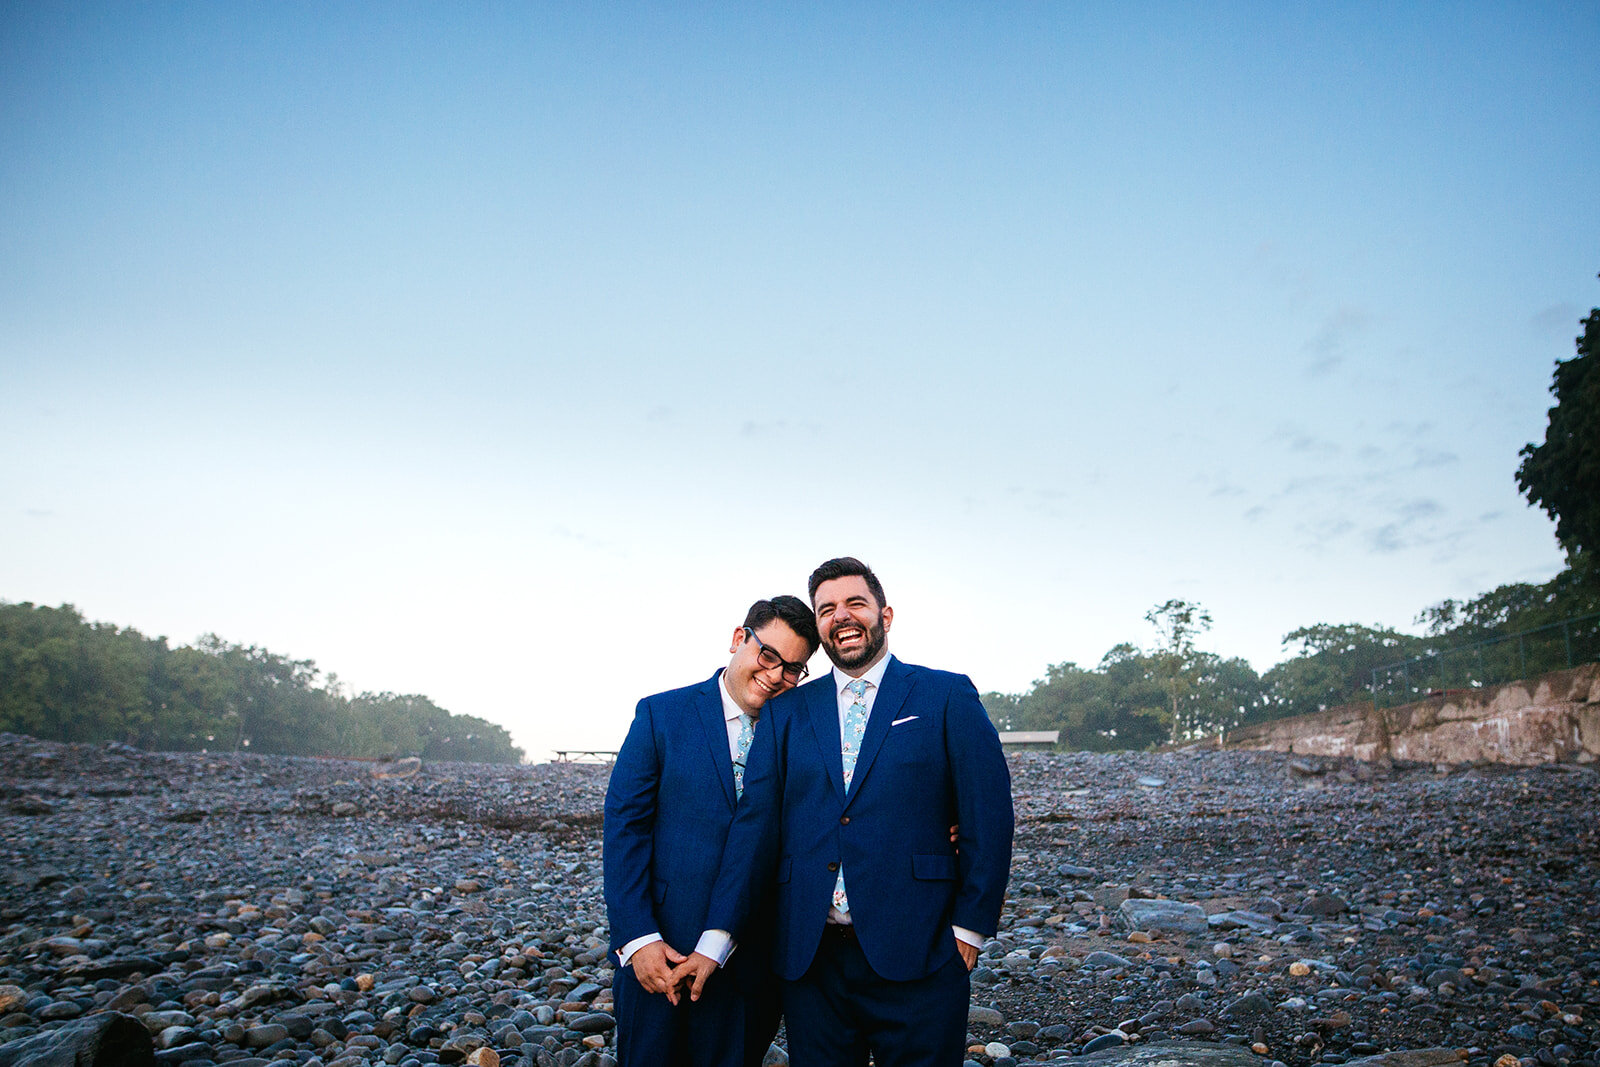 LGBTQ couple laughing in matching suits on Peaks Island Portland ME Shawnee Custalow wedding photography